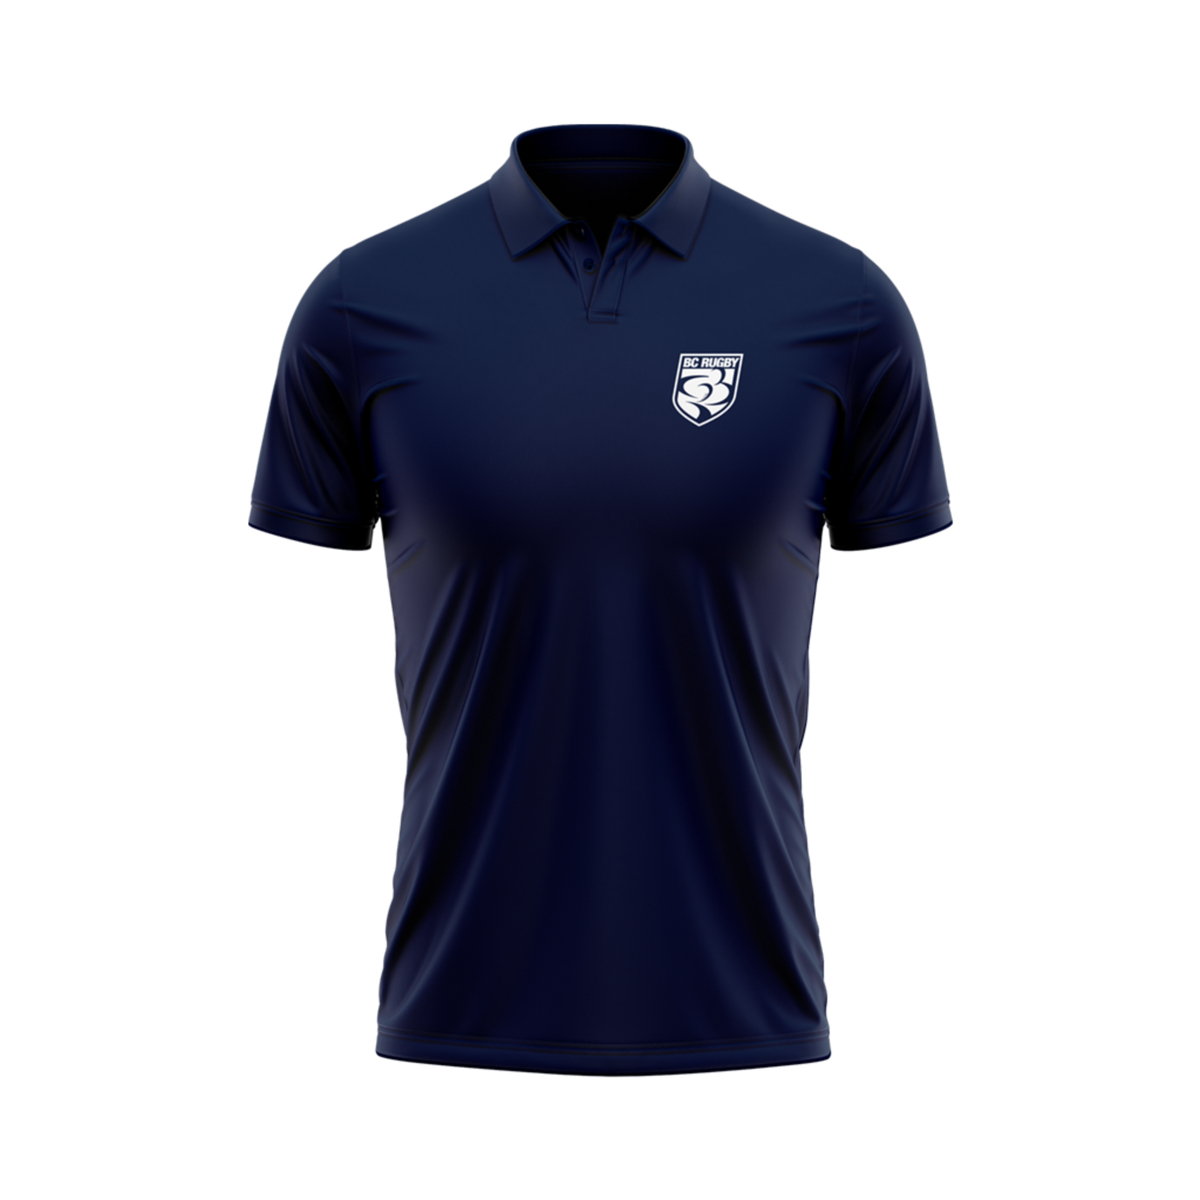 BC Rugby 2022 Polo - www.therugbyshop.com www.therugbyshop.com MEN&#39;S / NAVY W/ SHIELD / S XIX Brands TEES BC Rugby 2022 Polo